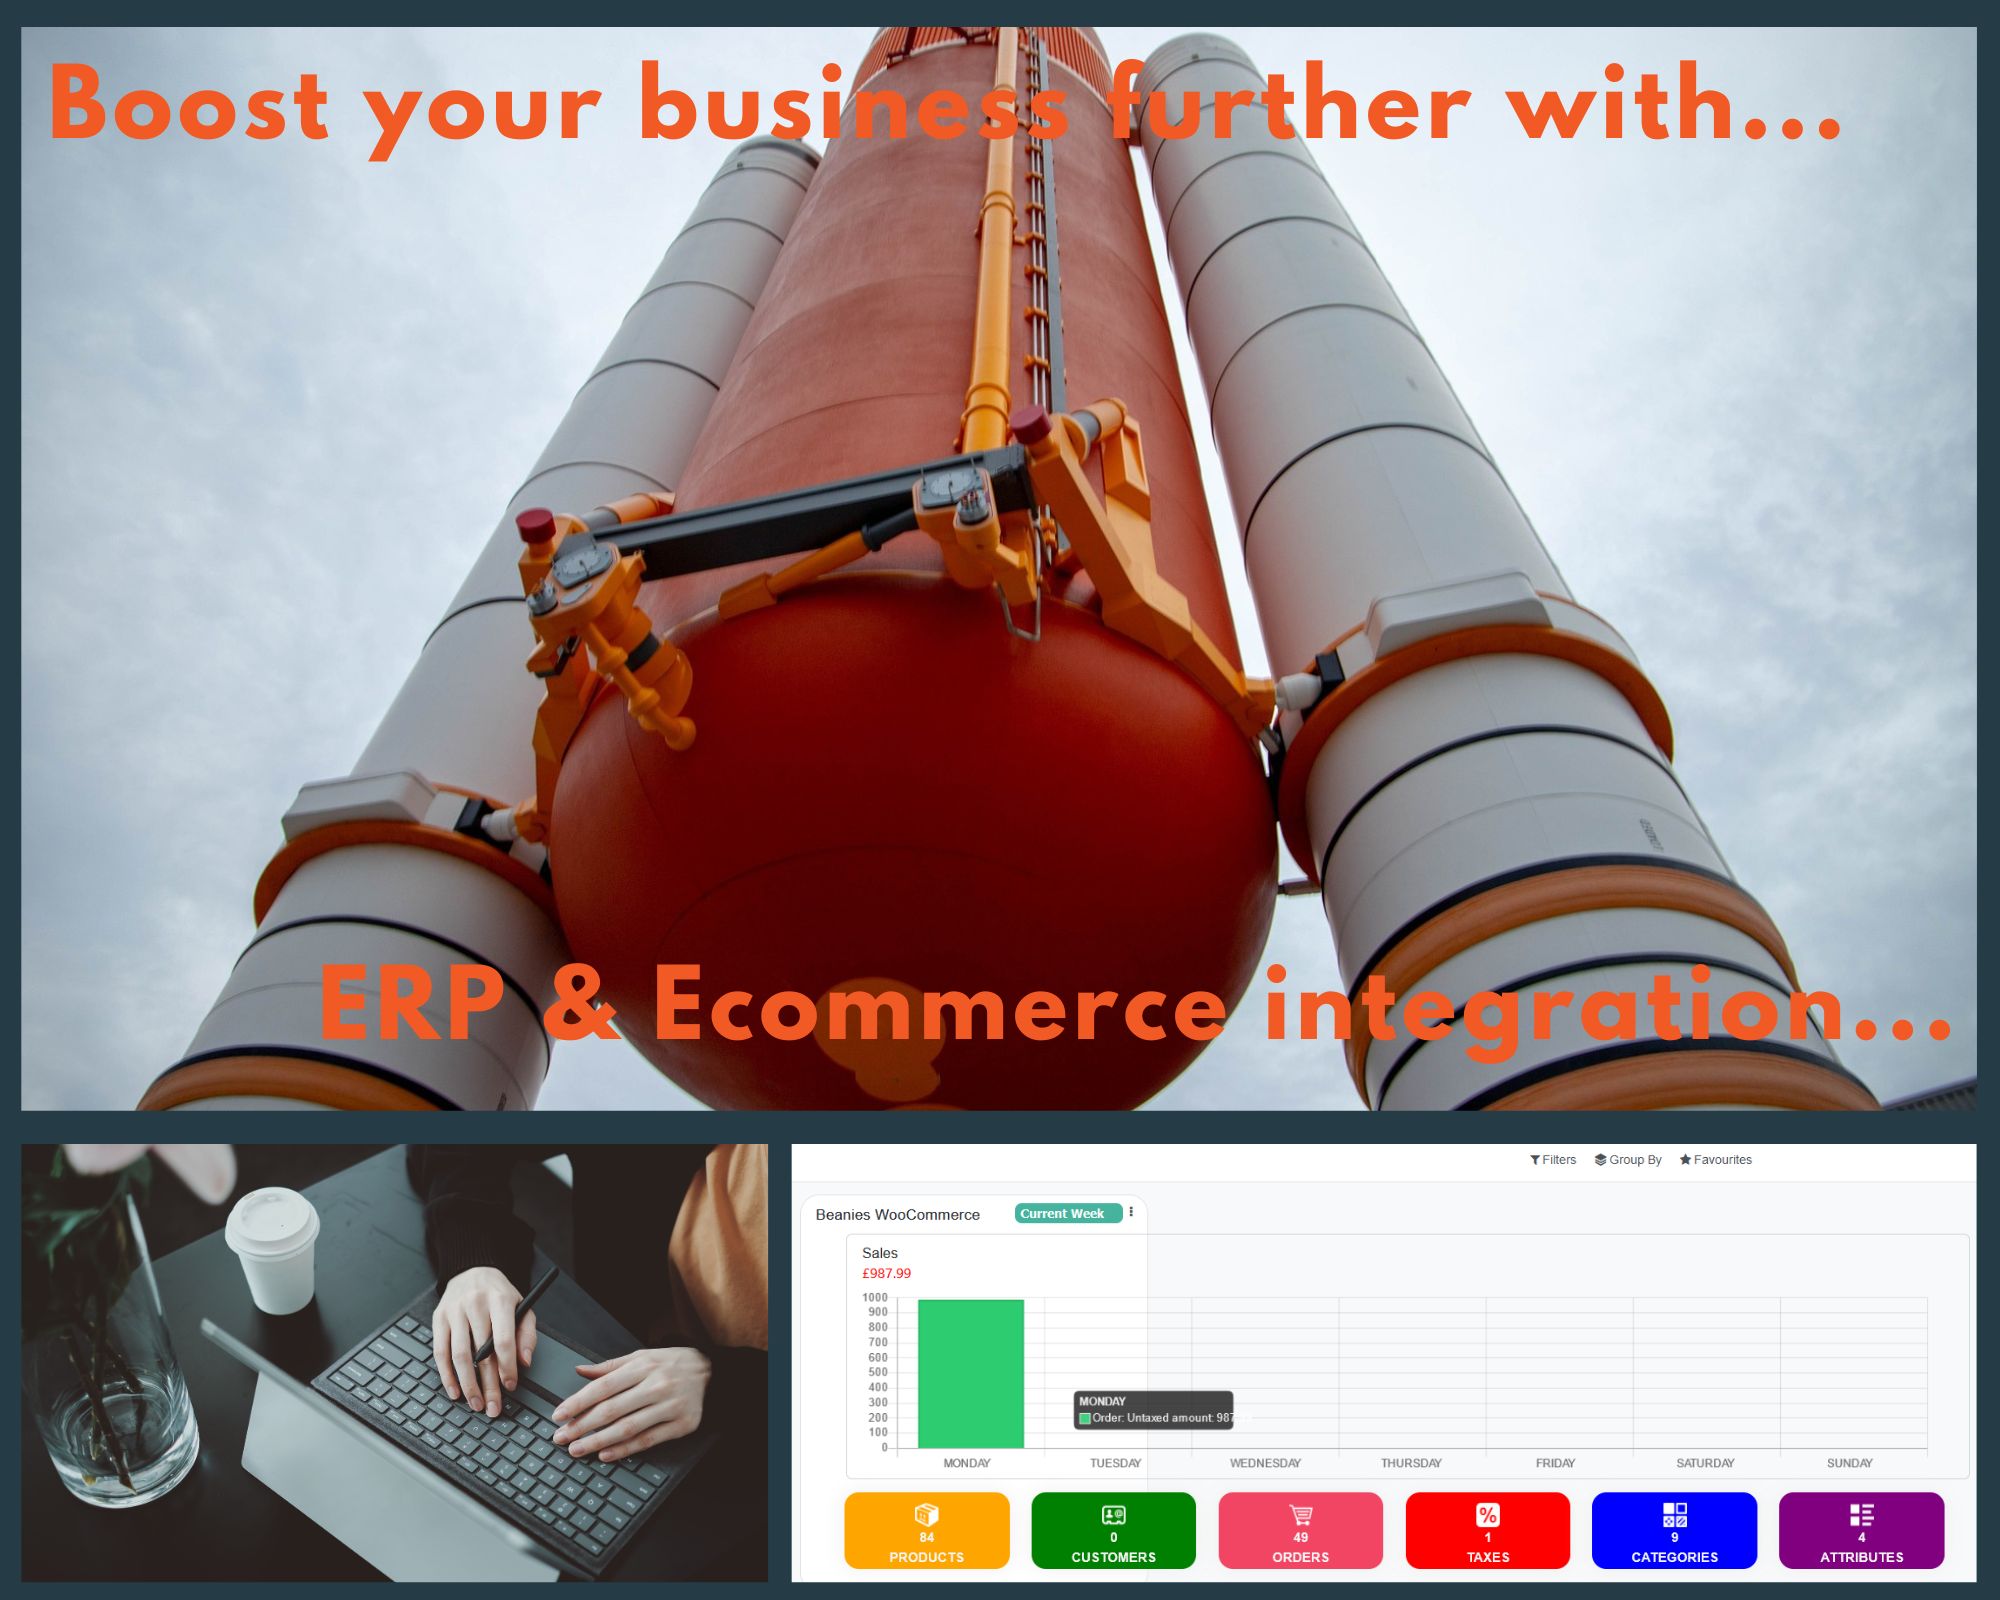 ERP-Software-Ecommerce-Integration-A-Boost-for-Your-Business